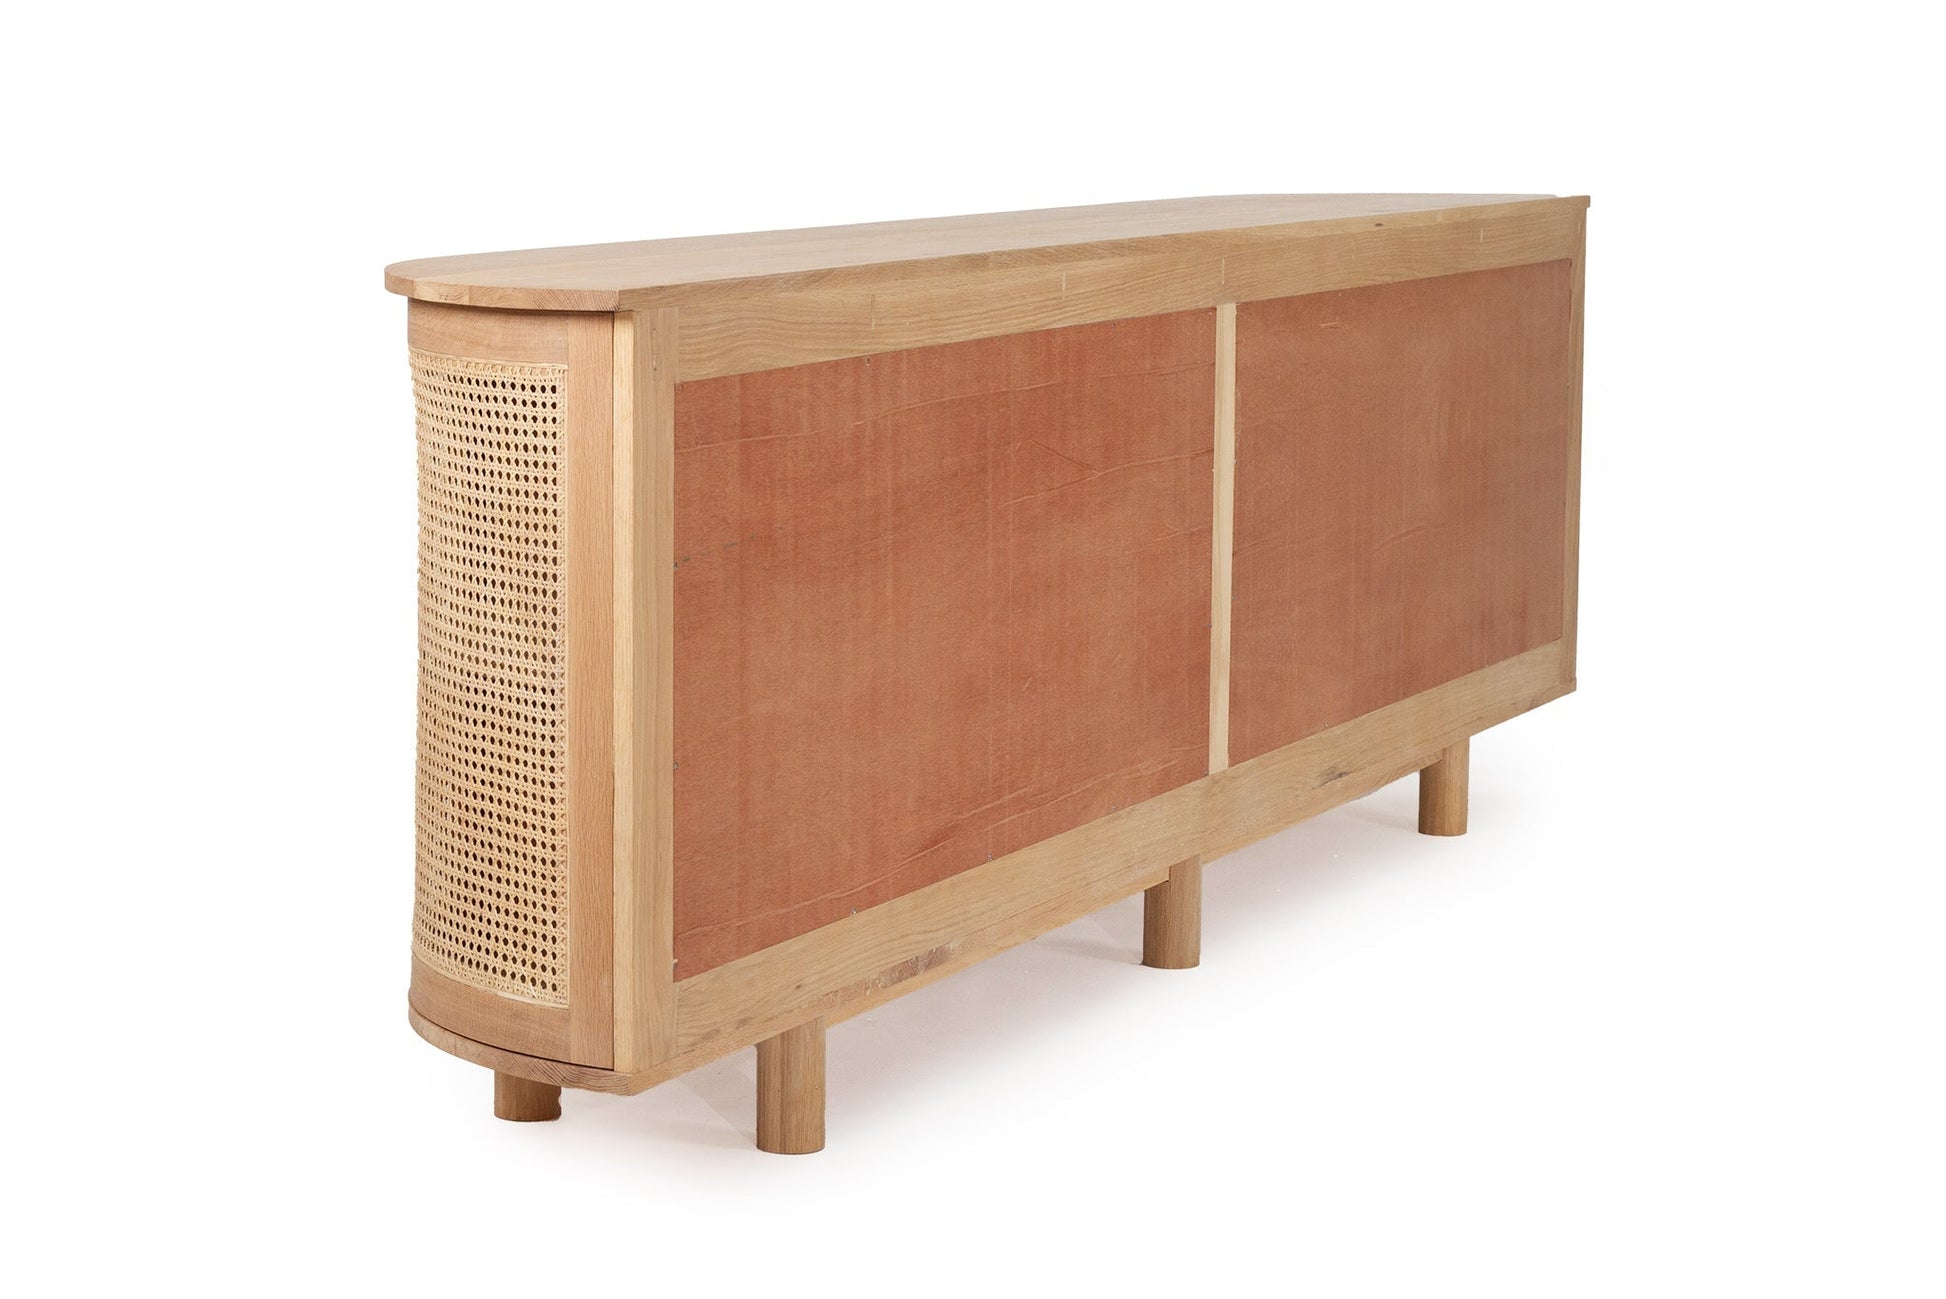 American Oak Curved Rounded Edge Sideboard - Hali - 2 Sizes Sun Republic 